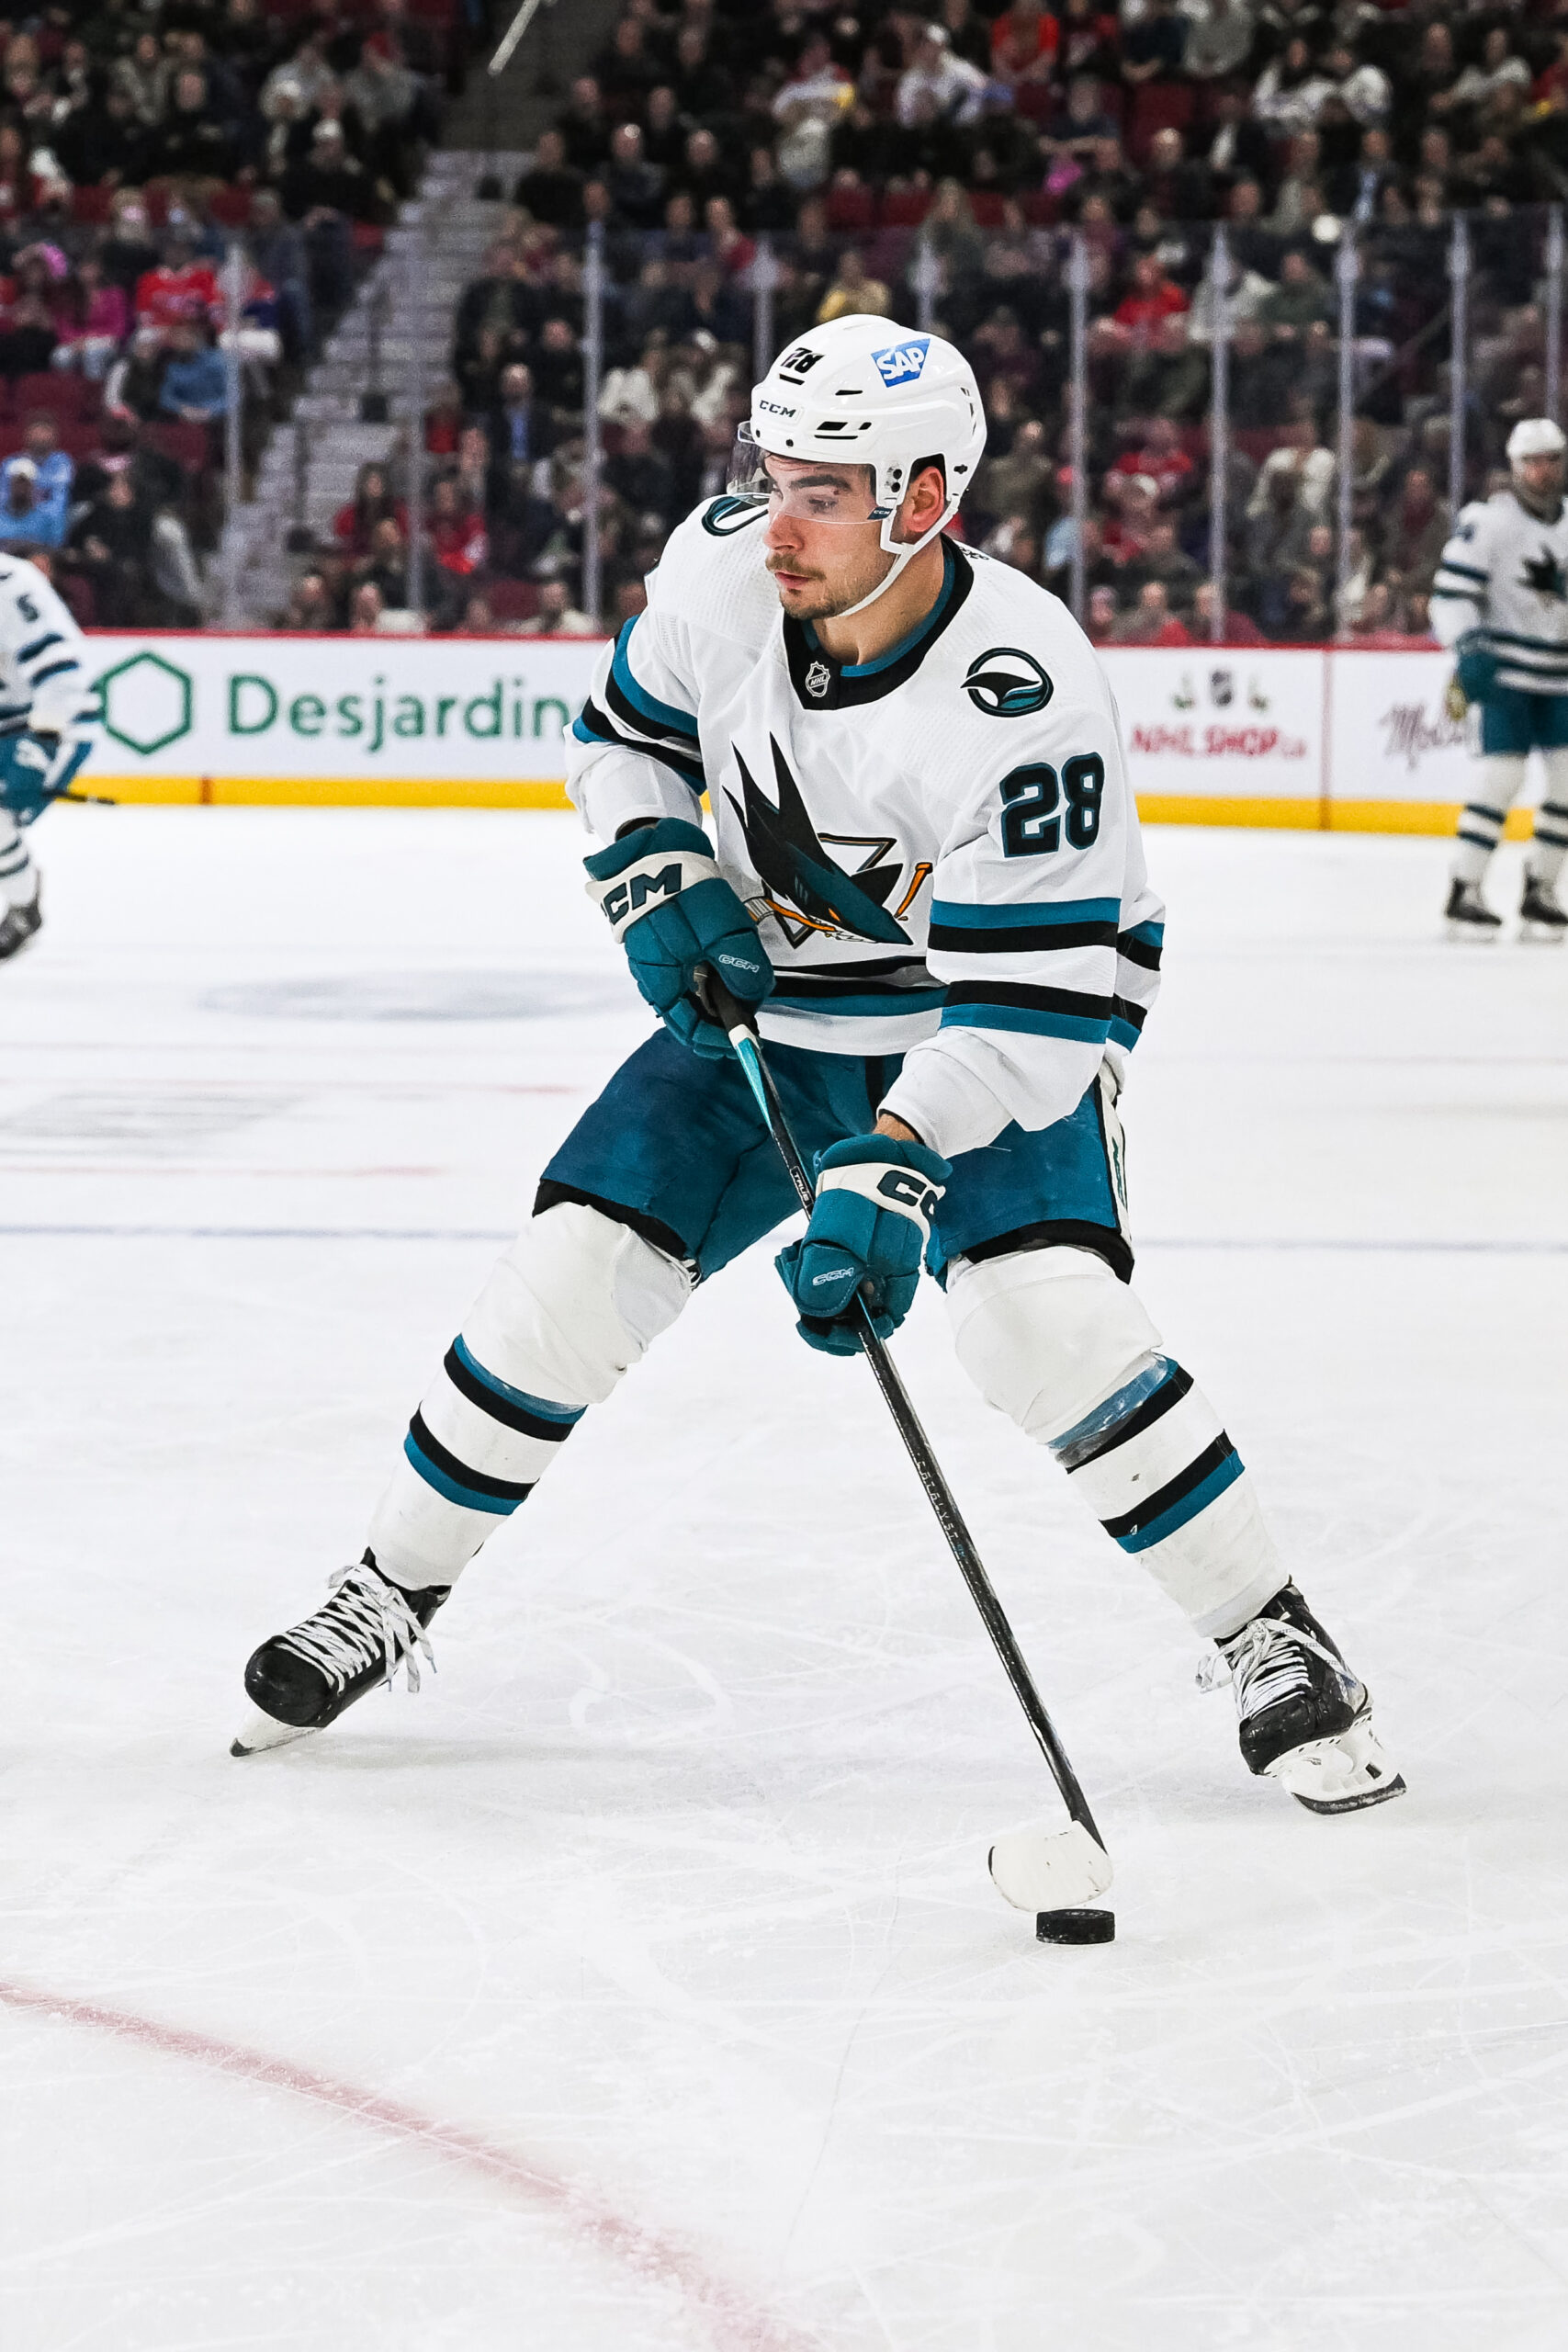 Timo Meier Devils jersey: How to get Devils gear online after blockbuster  trade with Sharks